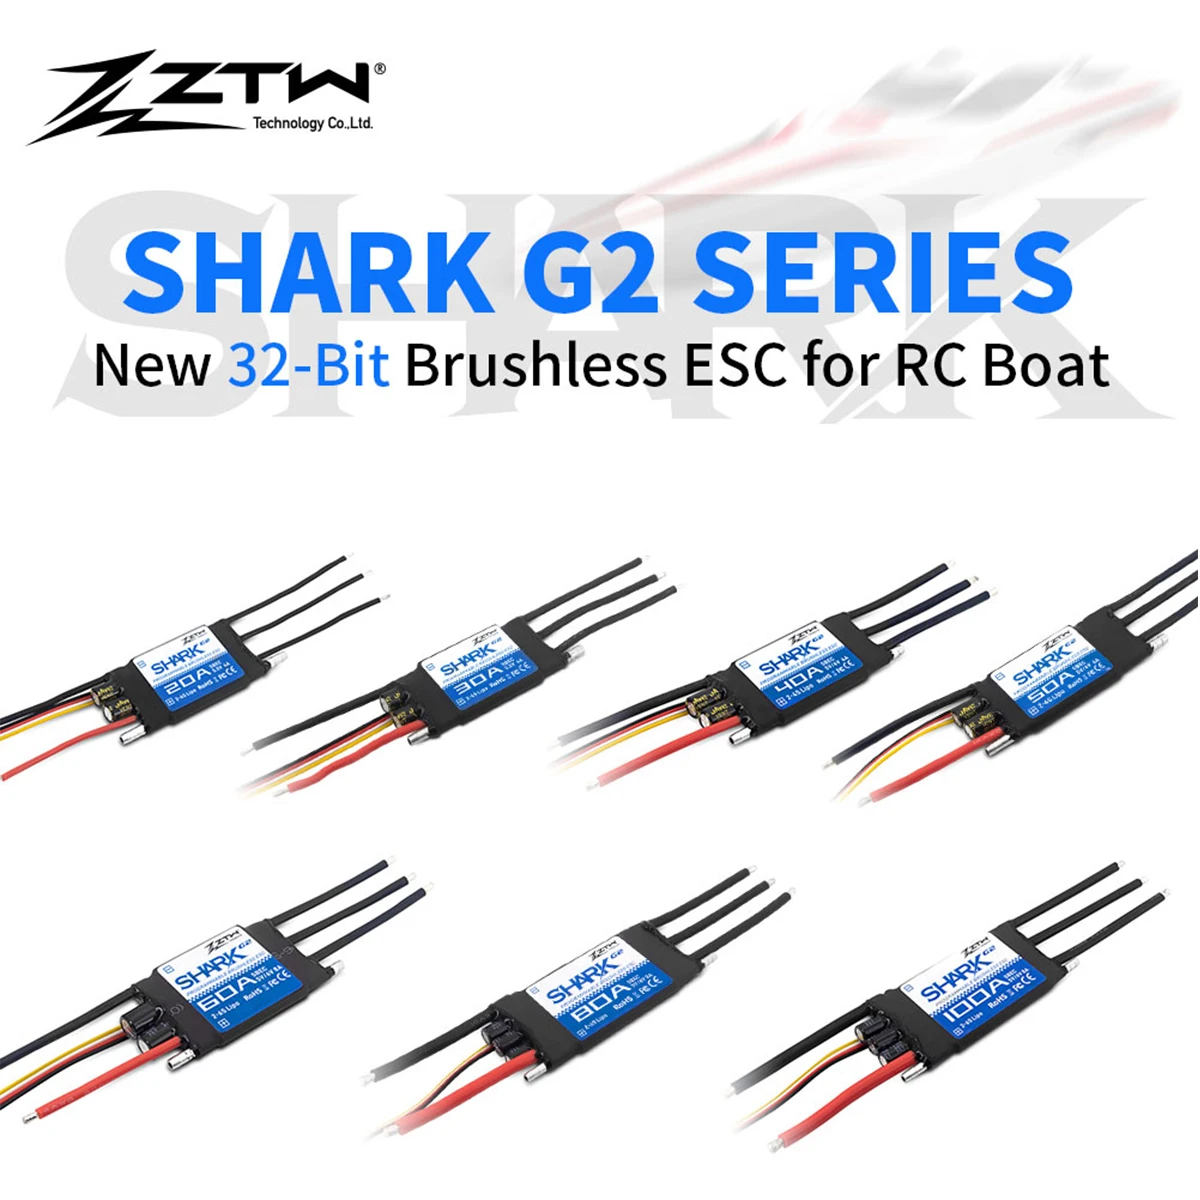 

ZTW 32-Bit ESC Shark G2 20A 30A 40A 50A 60A 80A 100A SBEC 5V/6V 8A Brushless Speed Controller for RC Boat Underwater Thruster